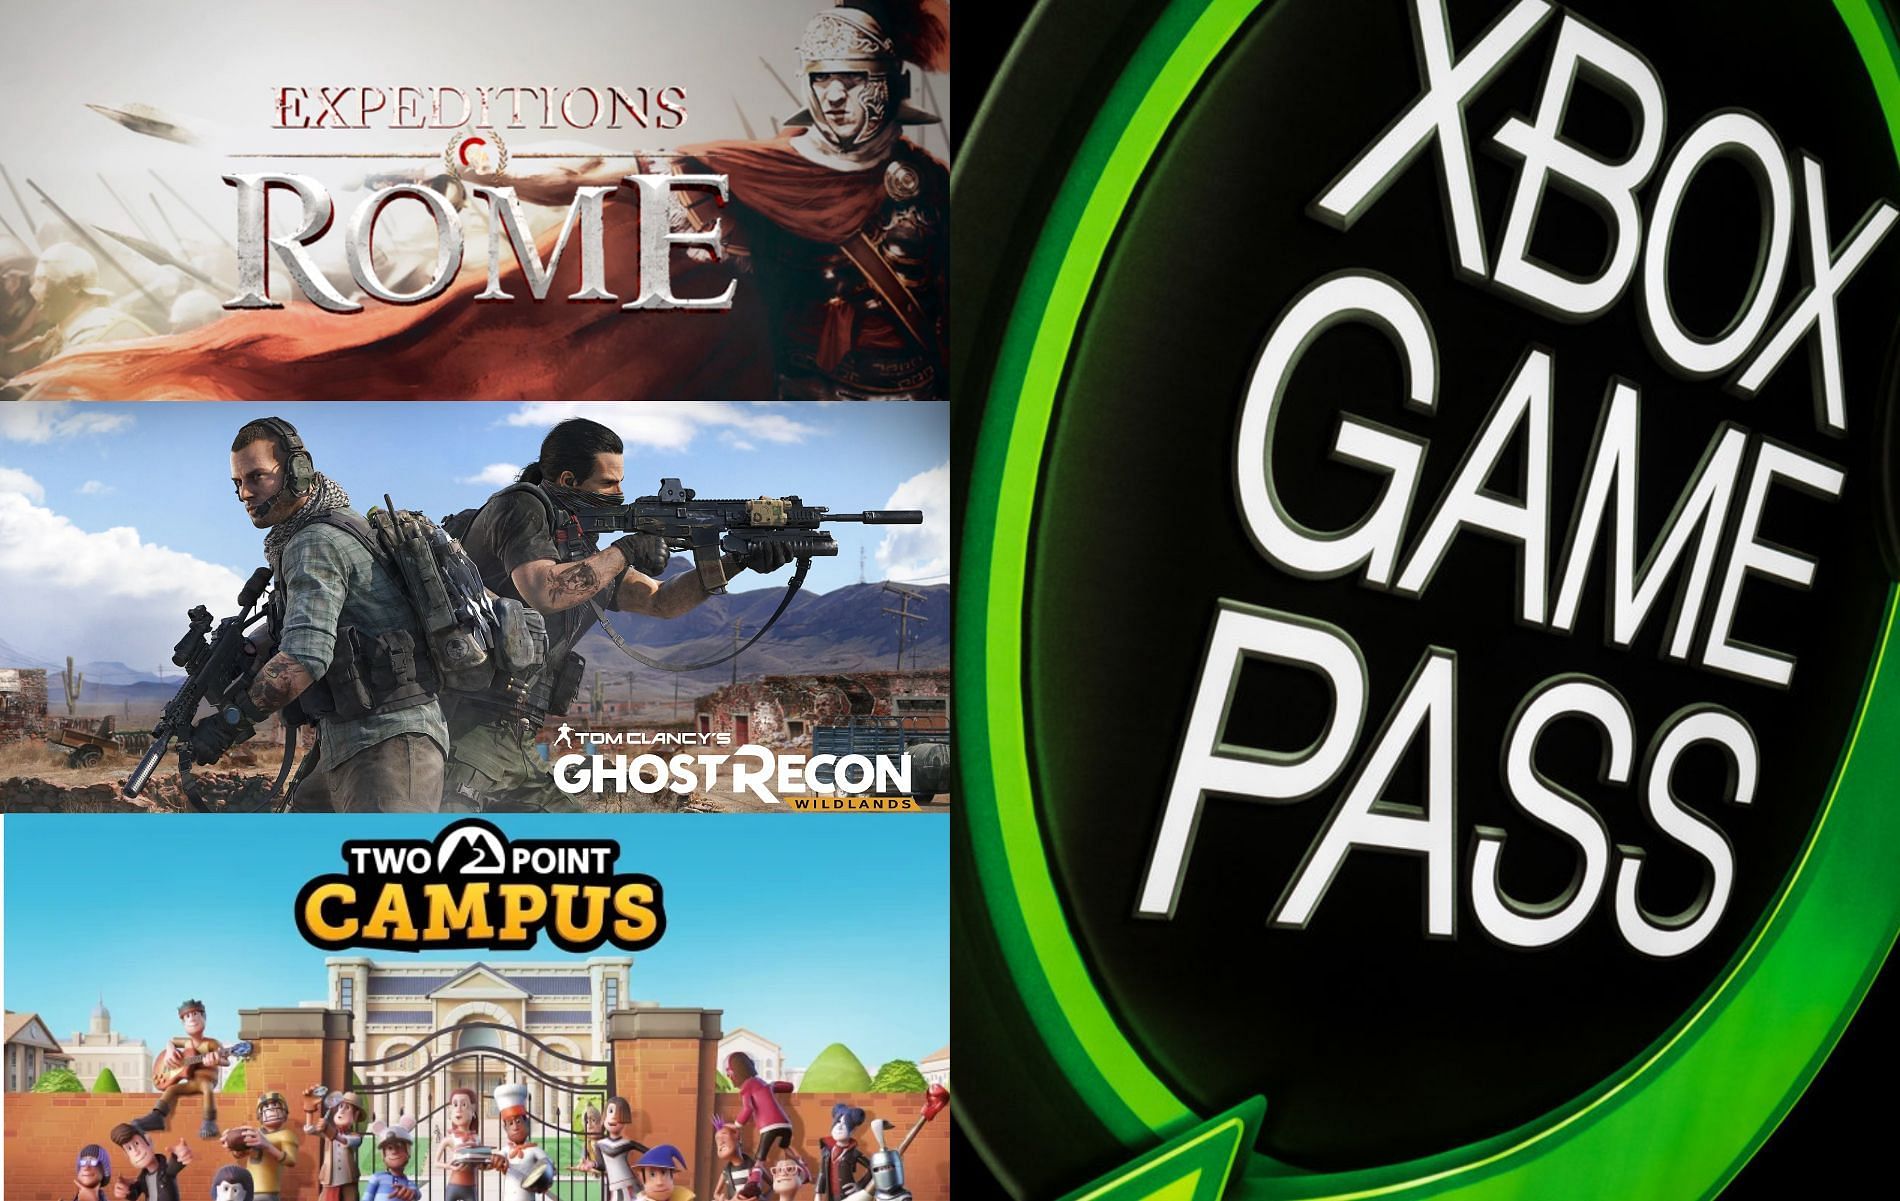 Ghost Recon Wildlands, Two Point Campus, Expedition Rome, and more coming to Game Pass (image vis Sportskeeda)